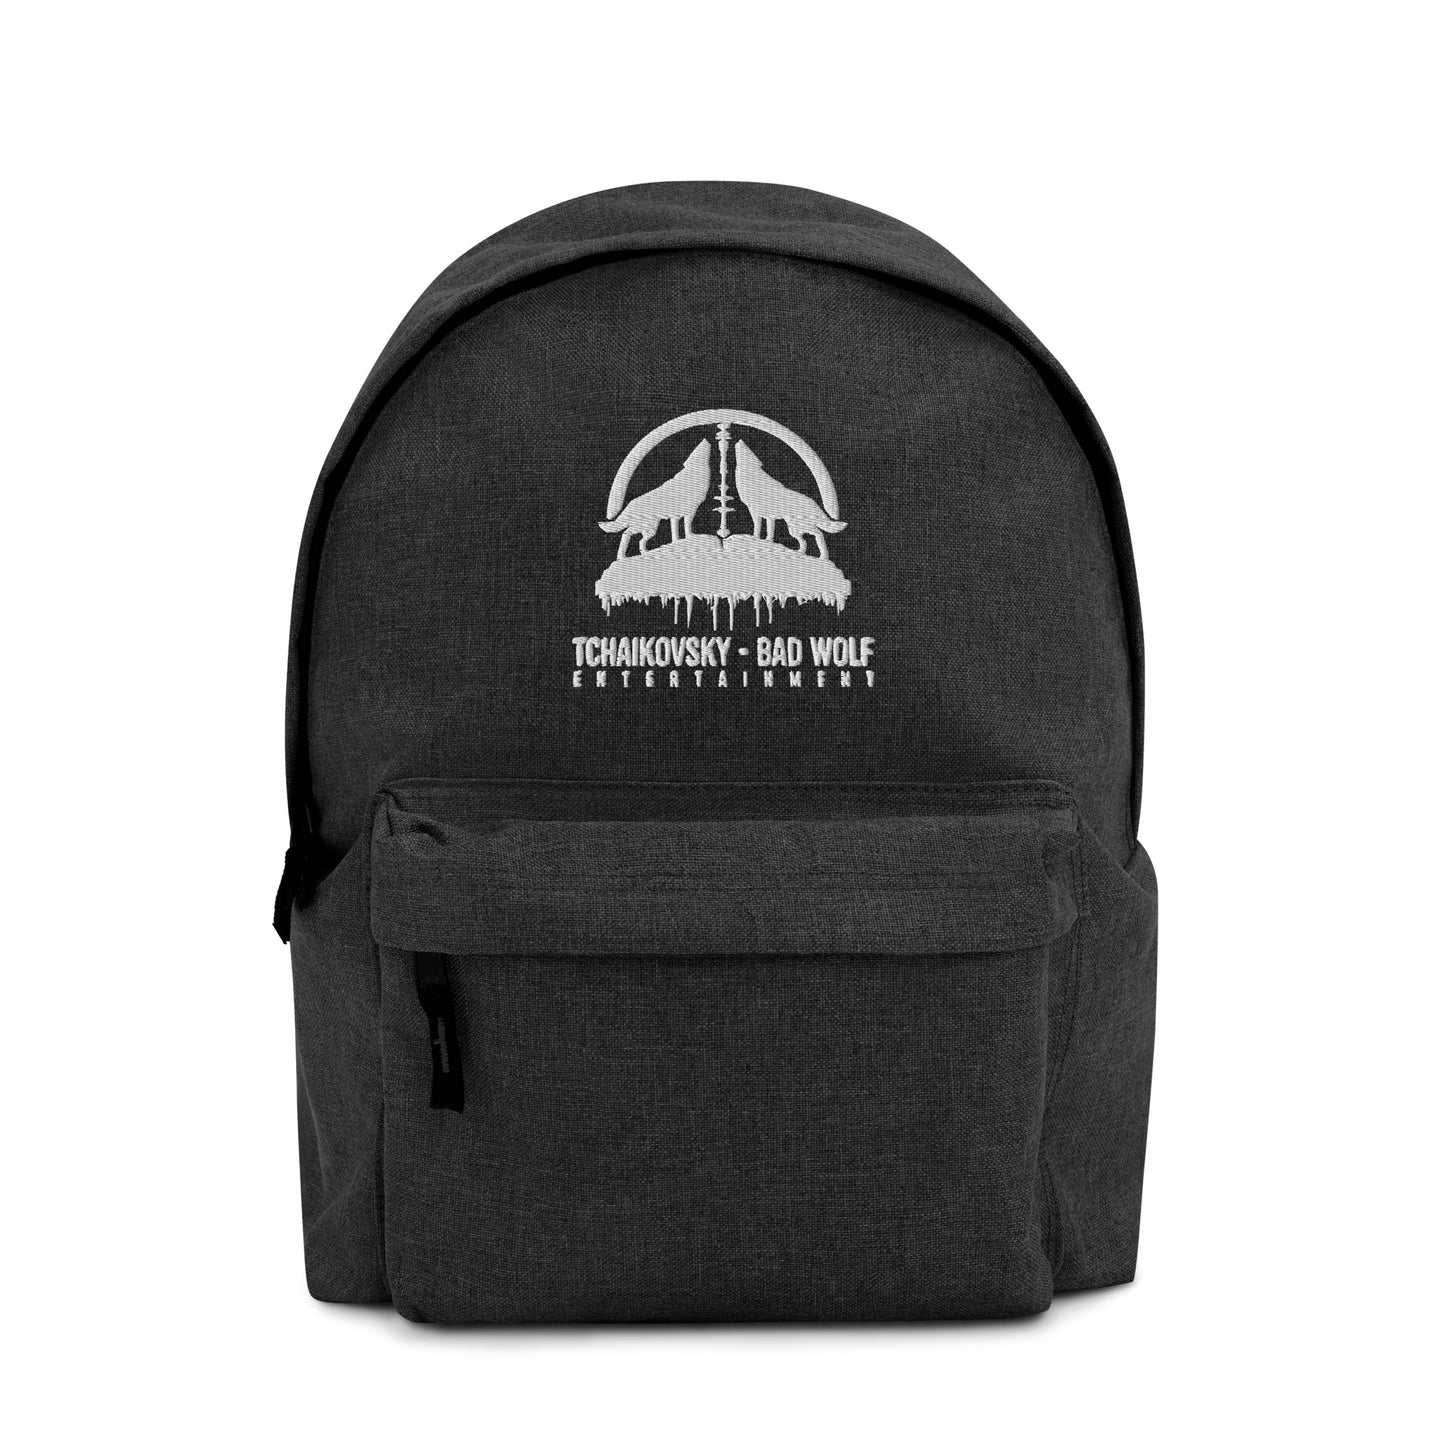 TBW Ent. Embroidered Backpack